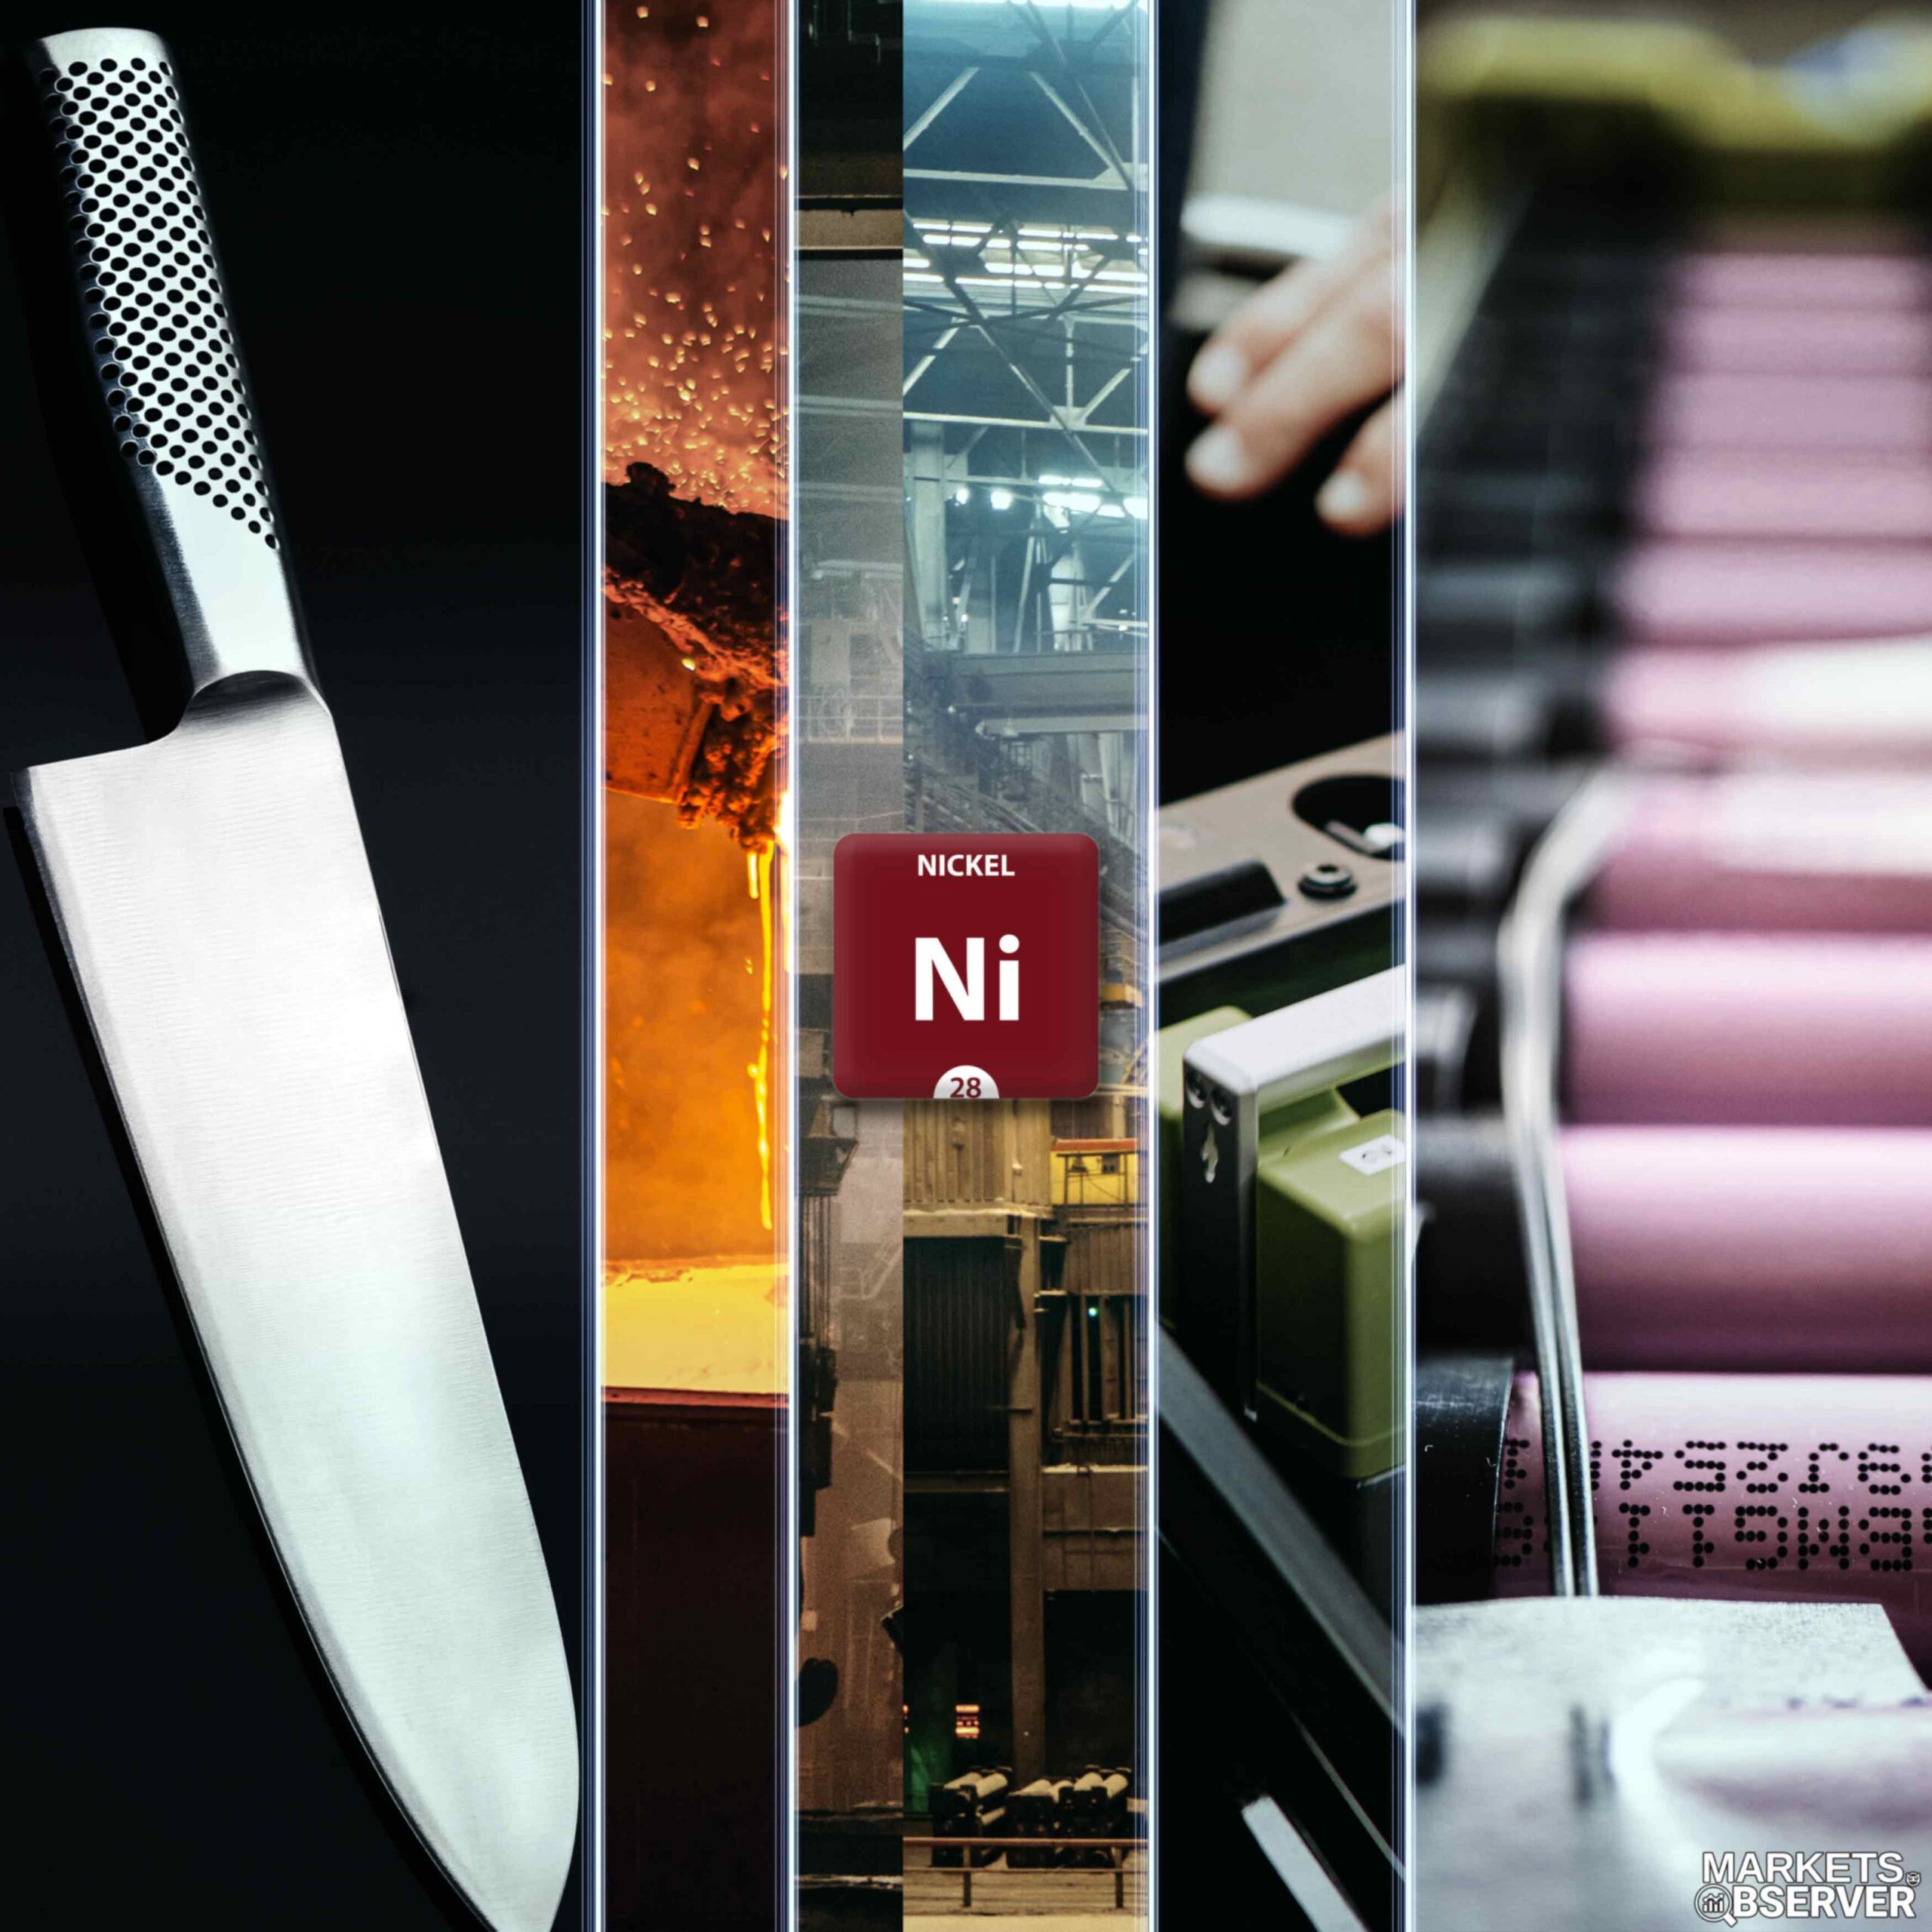 Nickel banner image showing Nickel periodic element tile plus various applications of Nickel - as a needed additive to make stainless steel illustrated with a kitchen-knife and steel smelting backdrops. Nickel's use in rechargeable batteries is shown with an open Ni-Mh or NiCad pack and a removable Li-ion pack in an EV.